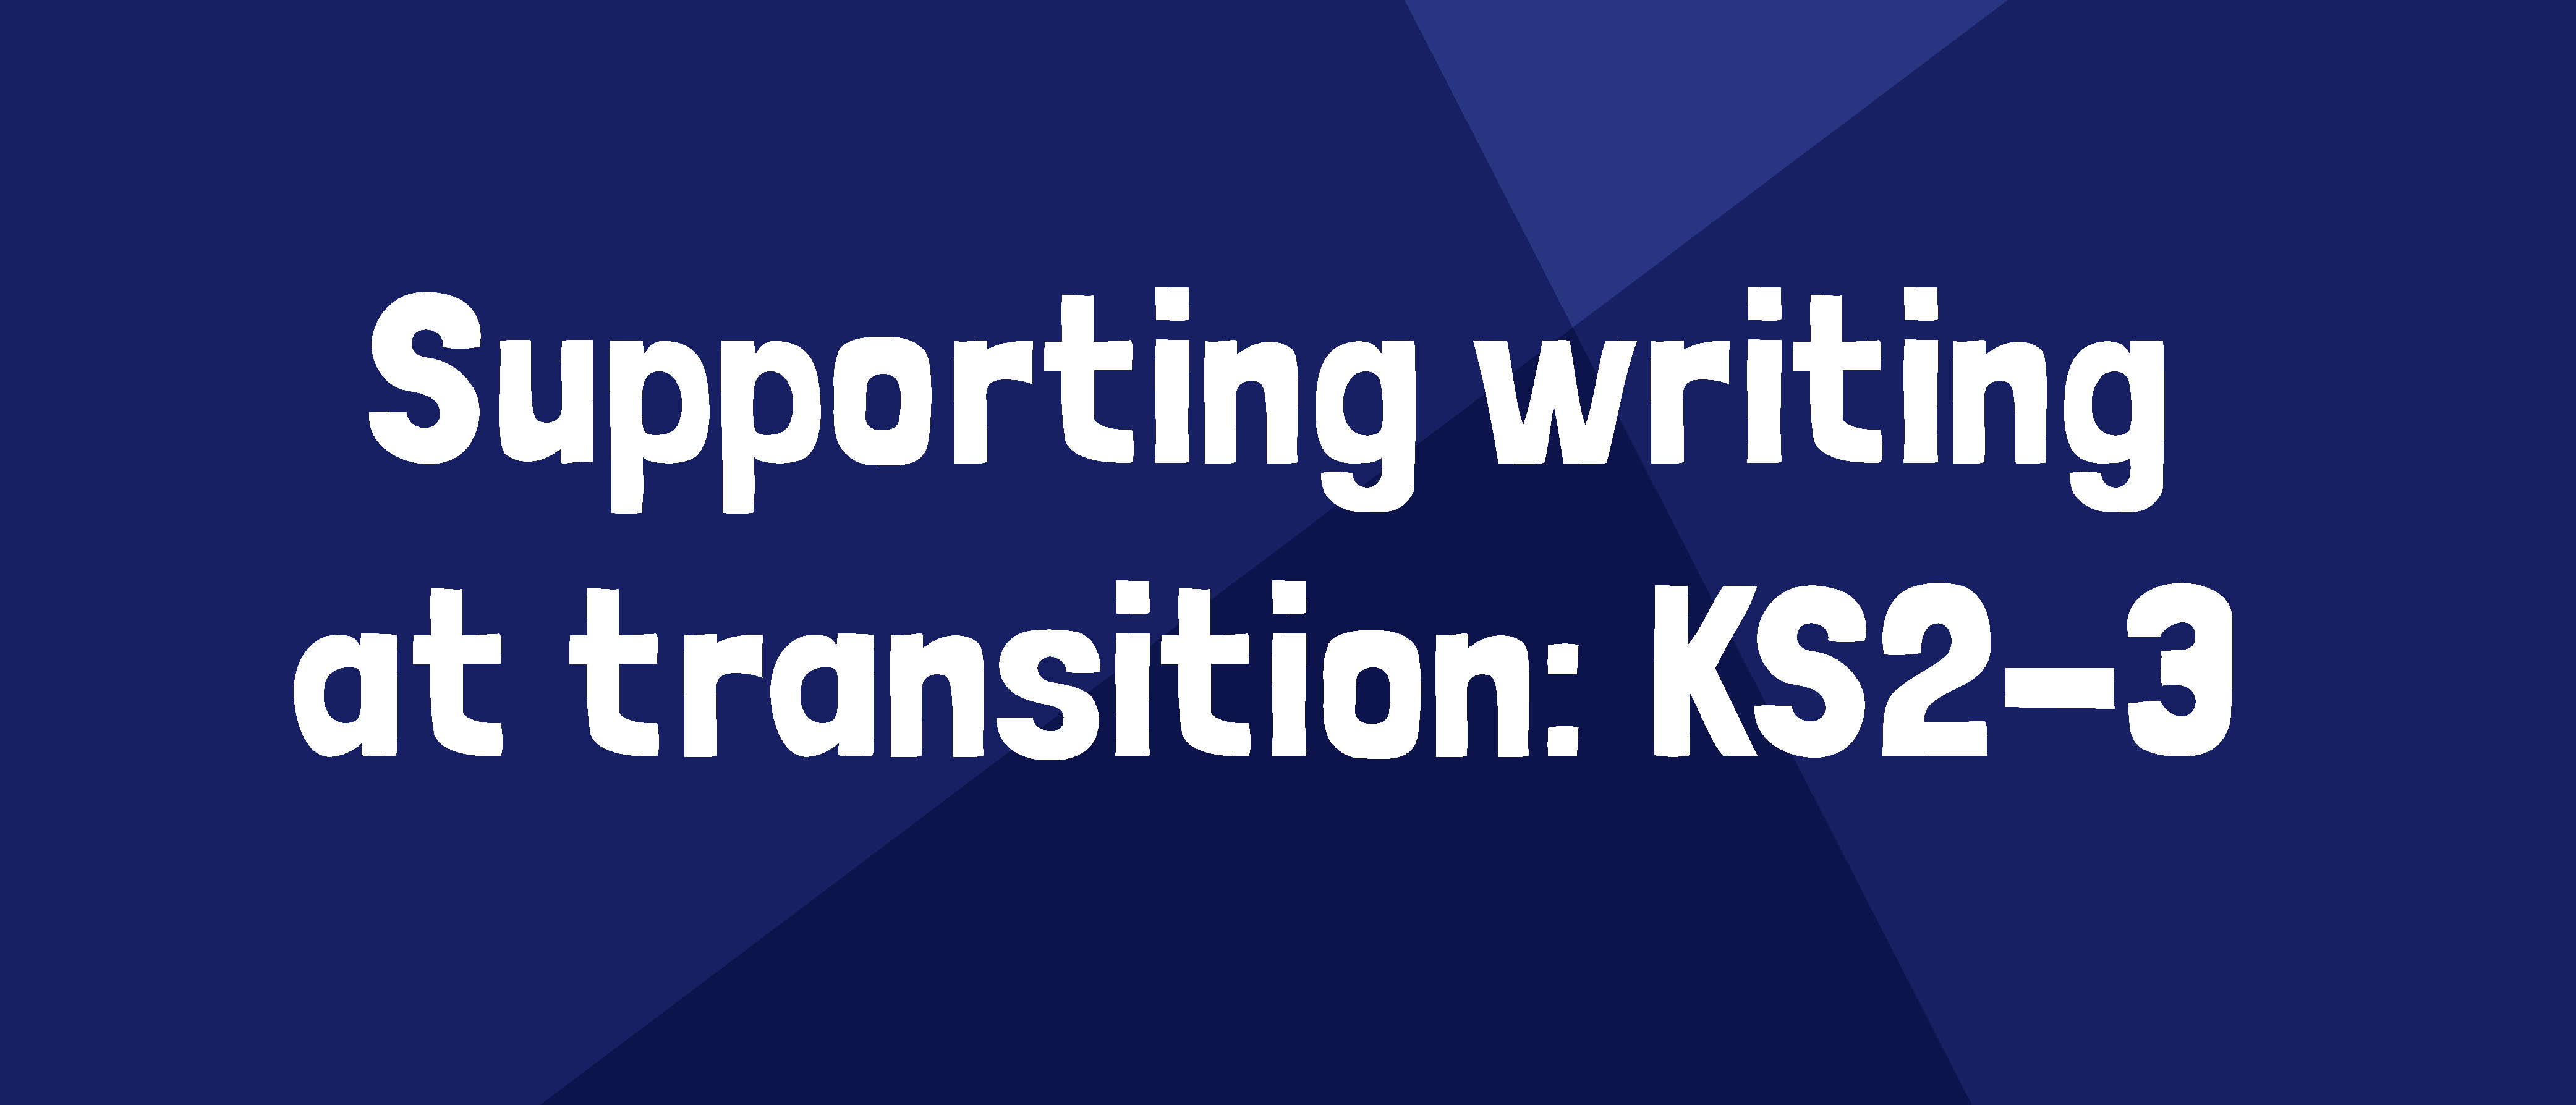 writing transitionWEB_BANNER-combined2.png